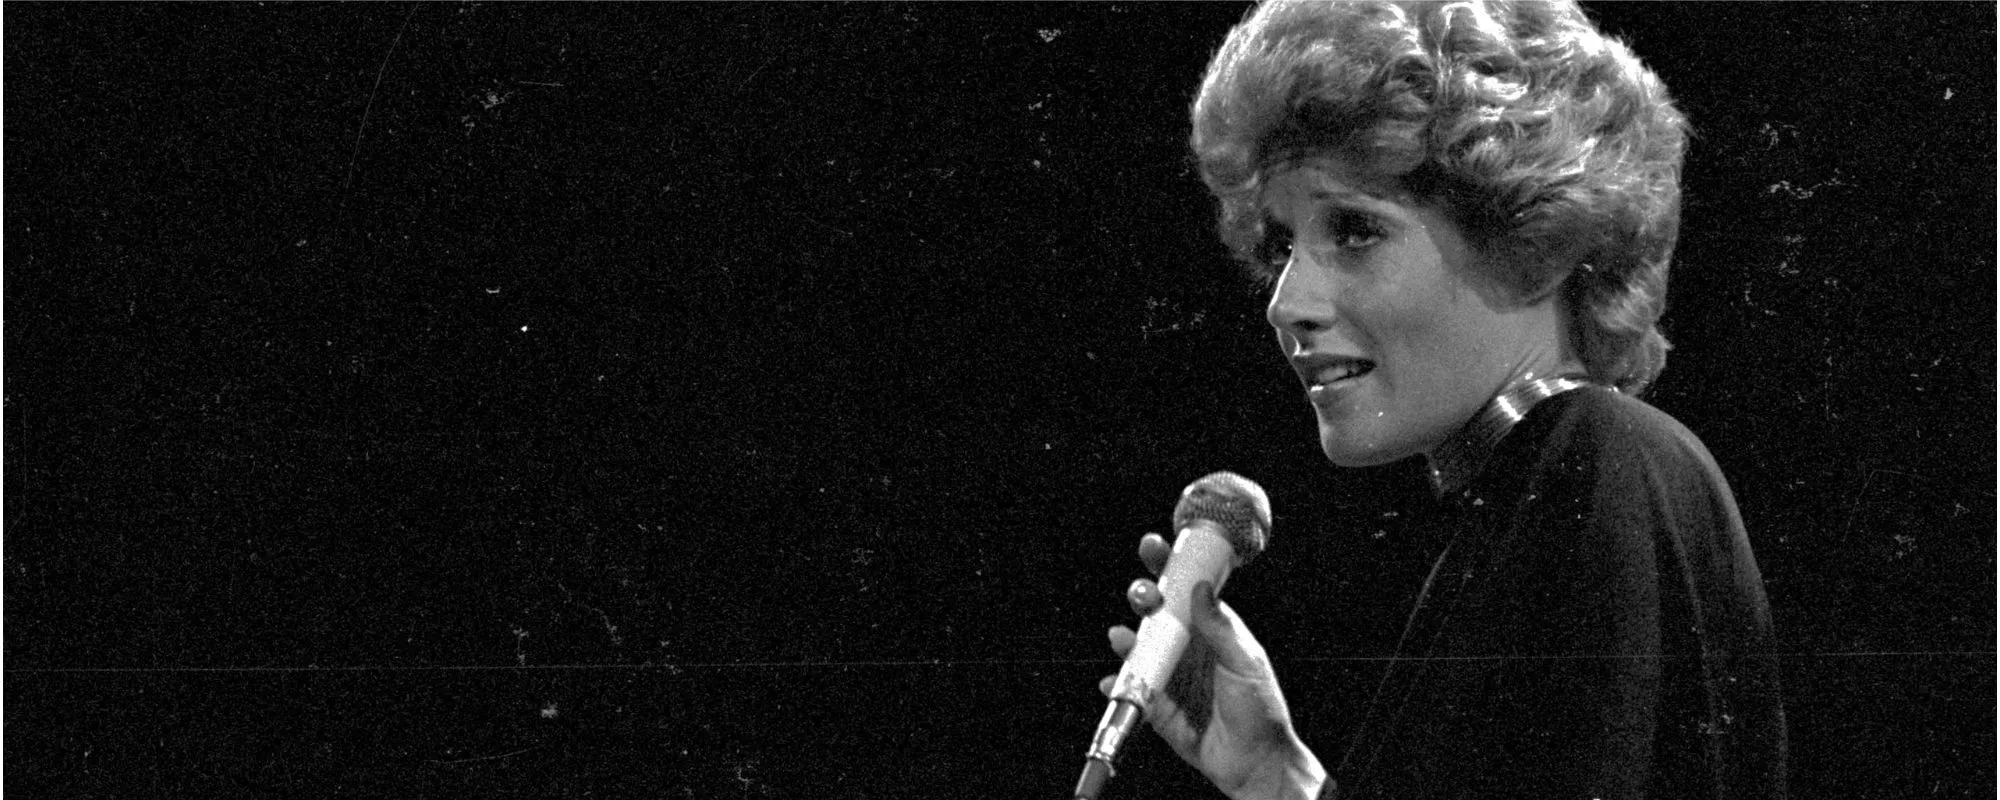 The Meaning Behind Lesley Gore’s Melodramatic “It’s My Party”